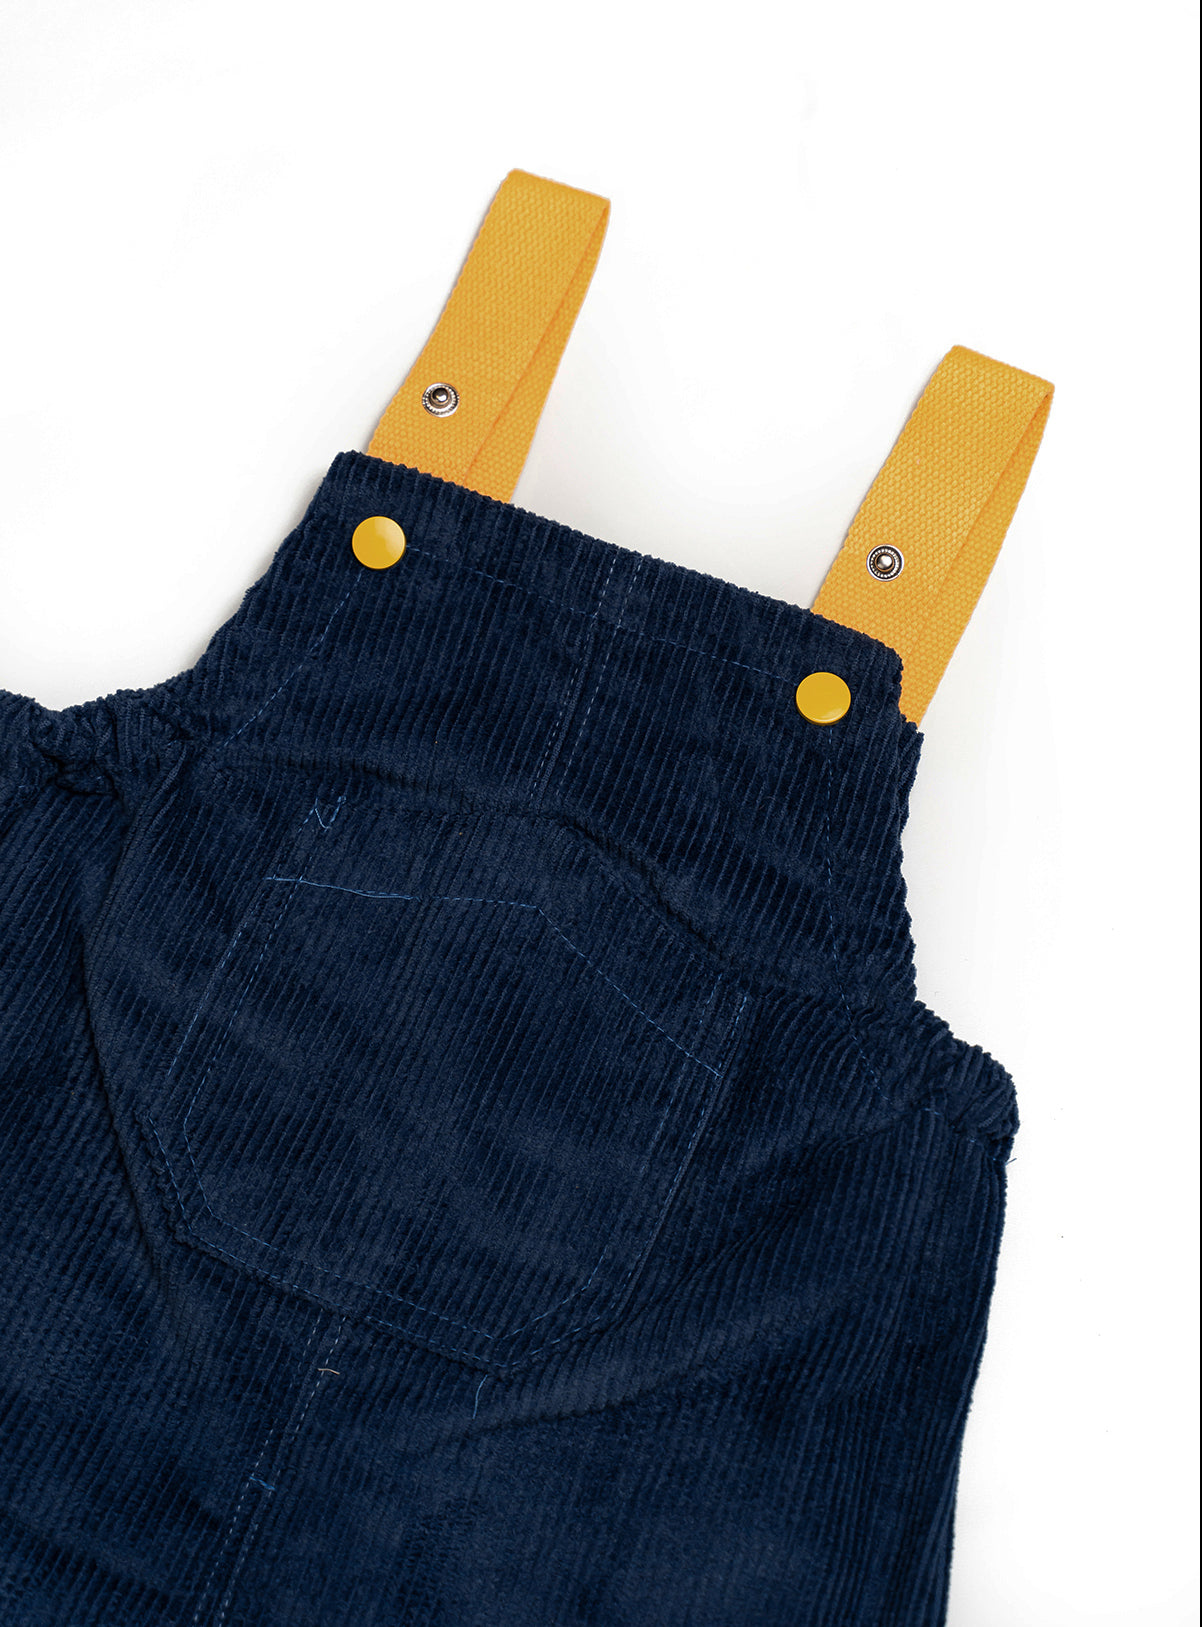 space blue corduroy overall